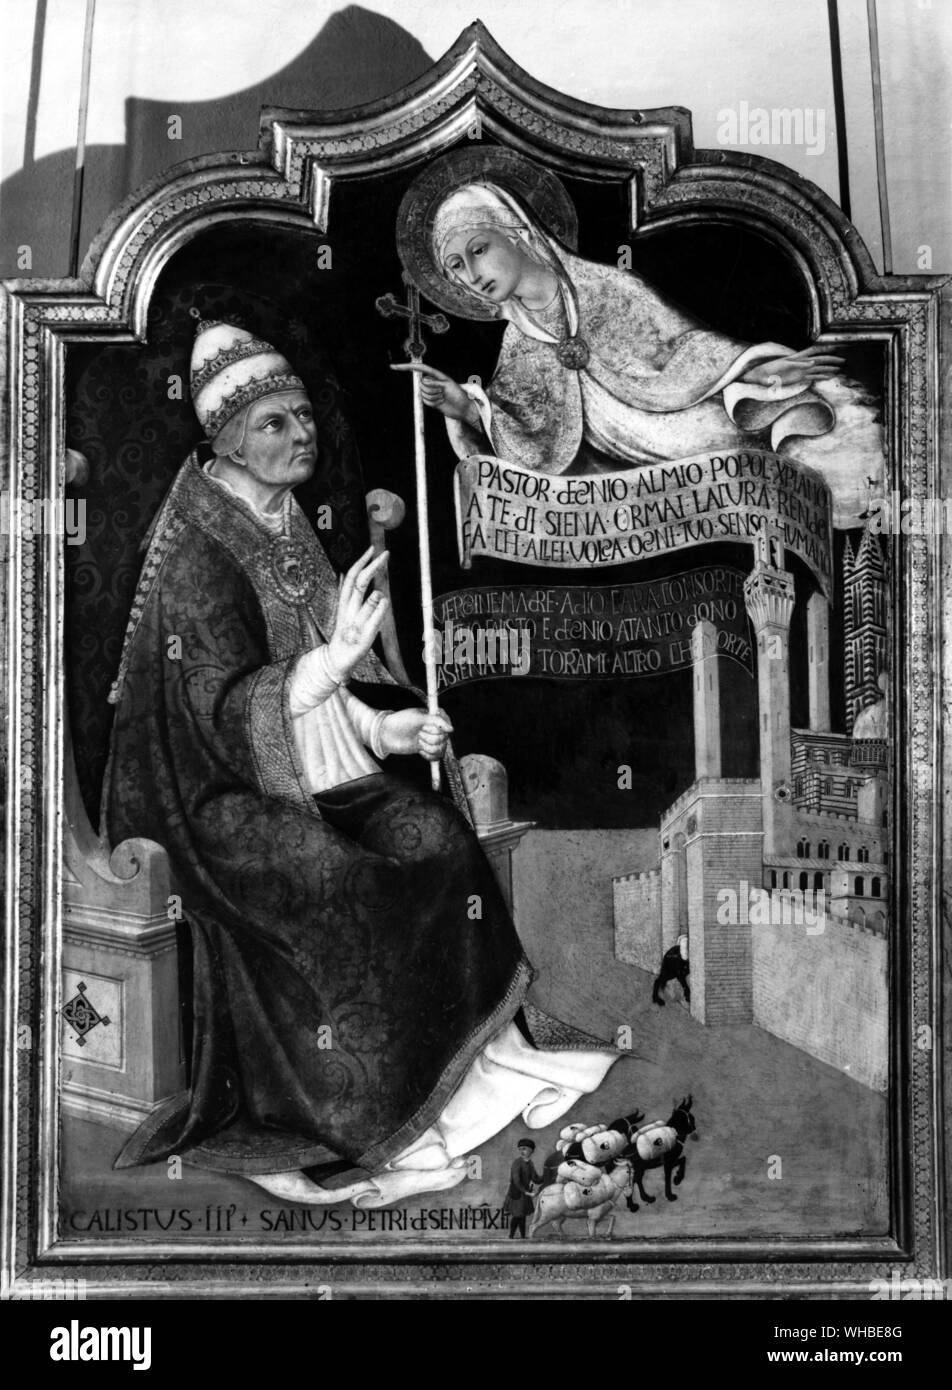 Sano di Pietro's portrait of Pope Calixtus III , as protector of the city  of Siena , commissioned by the Sienese in gratitude for the pope's  intervention against Jacopo Piccinino whose breach